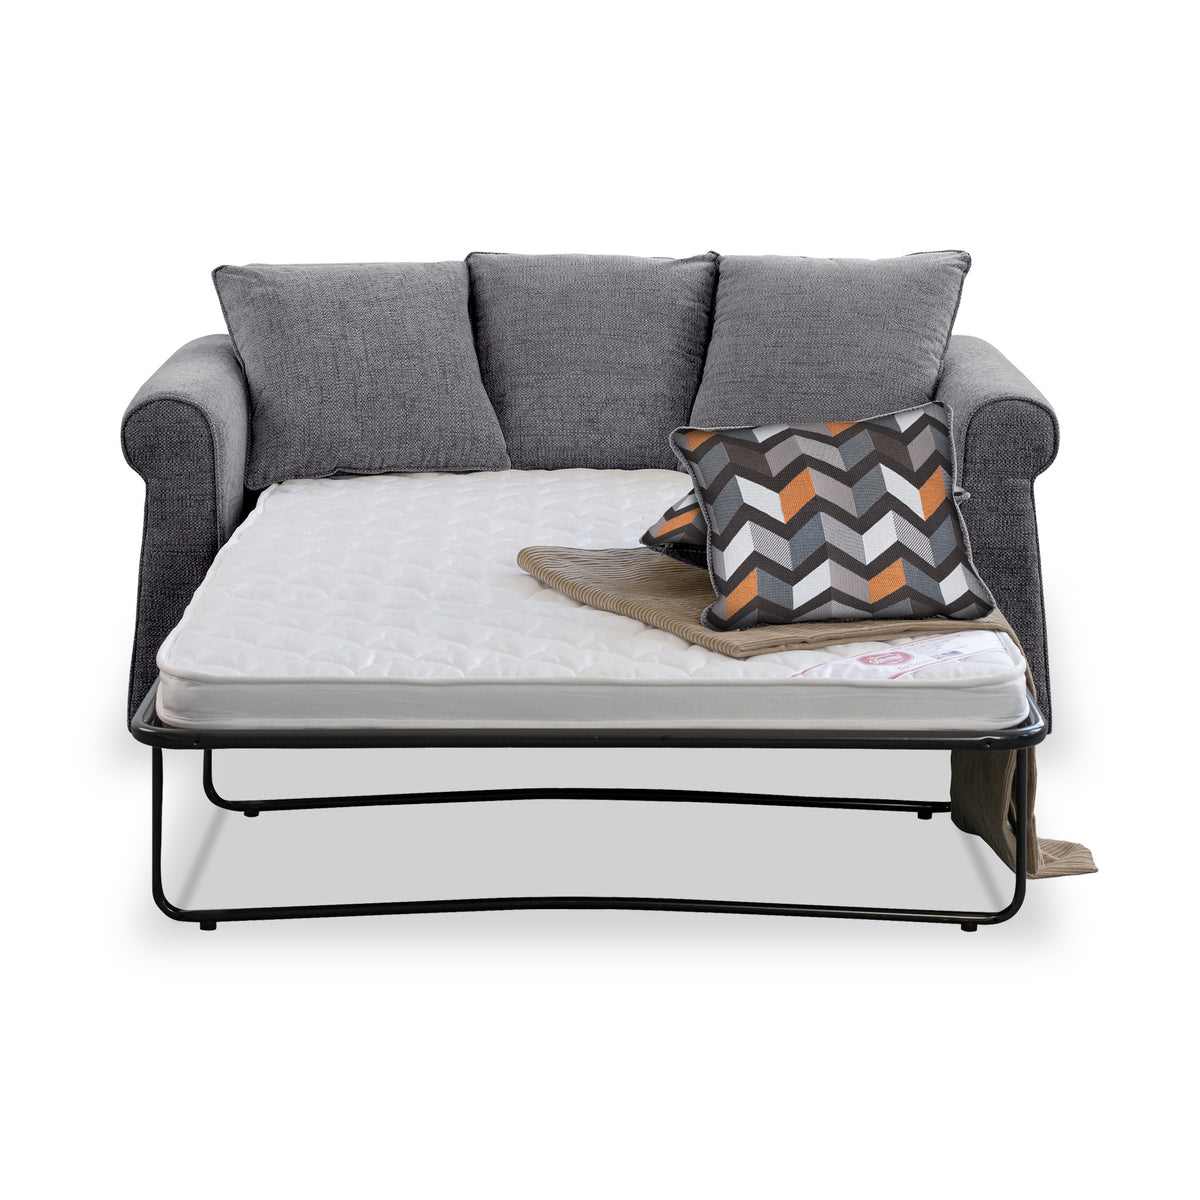 Branston Charcoal Soft Weave 2 Seater Sofabed with Charcoal Scatter Cushions from Roseland Furniture